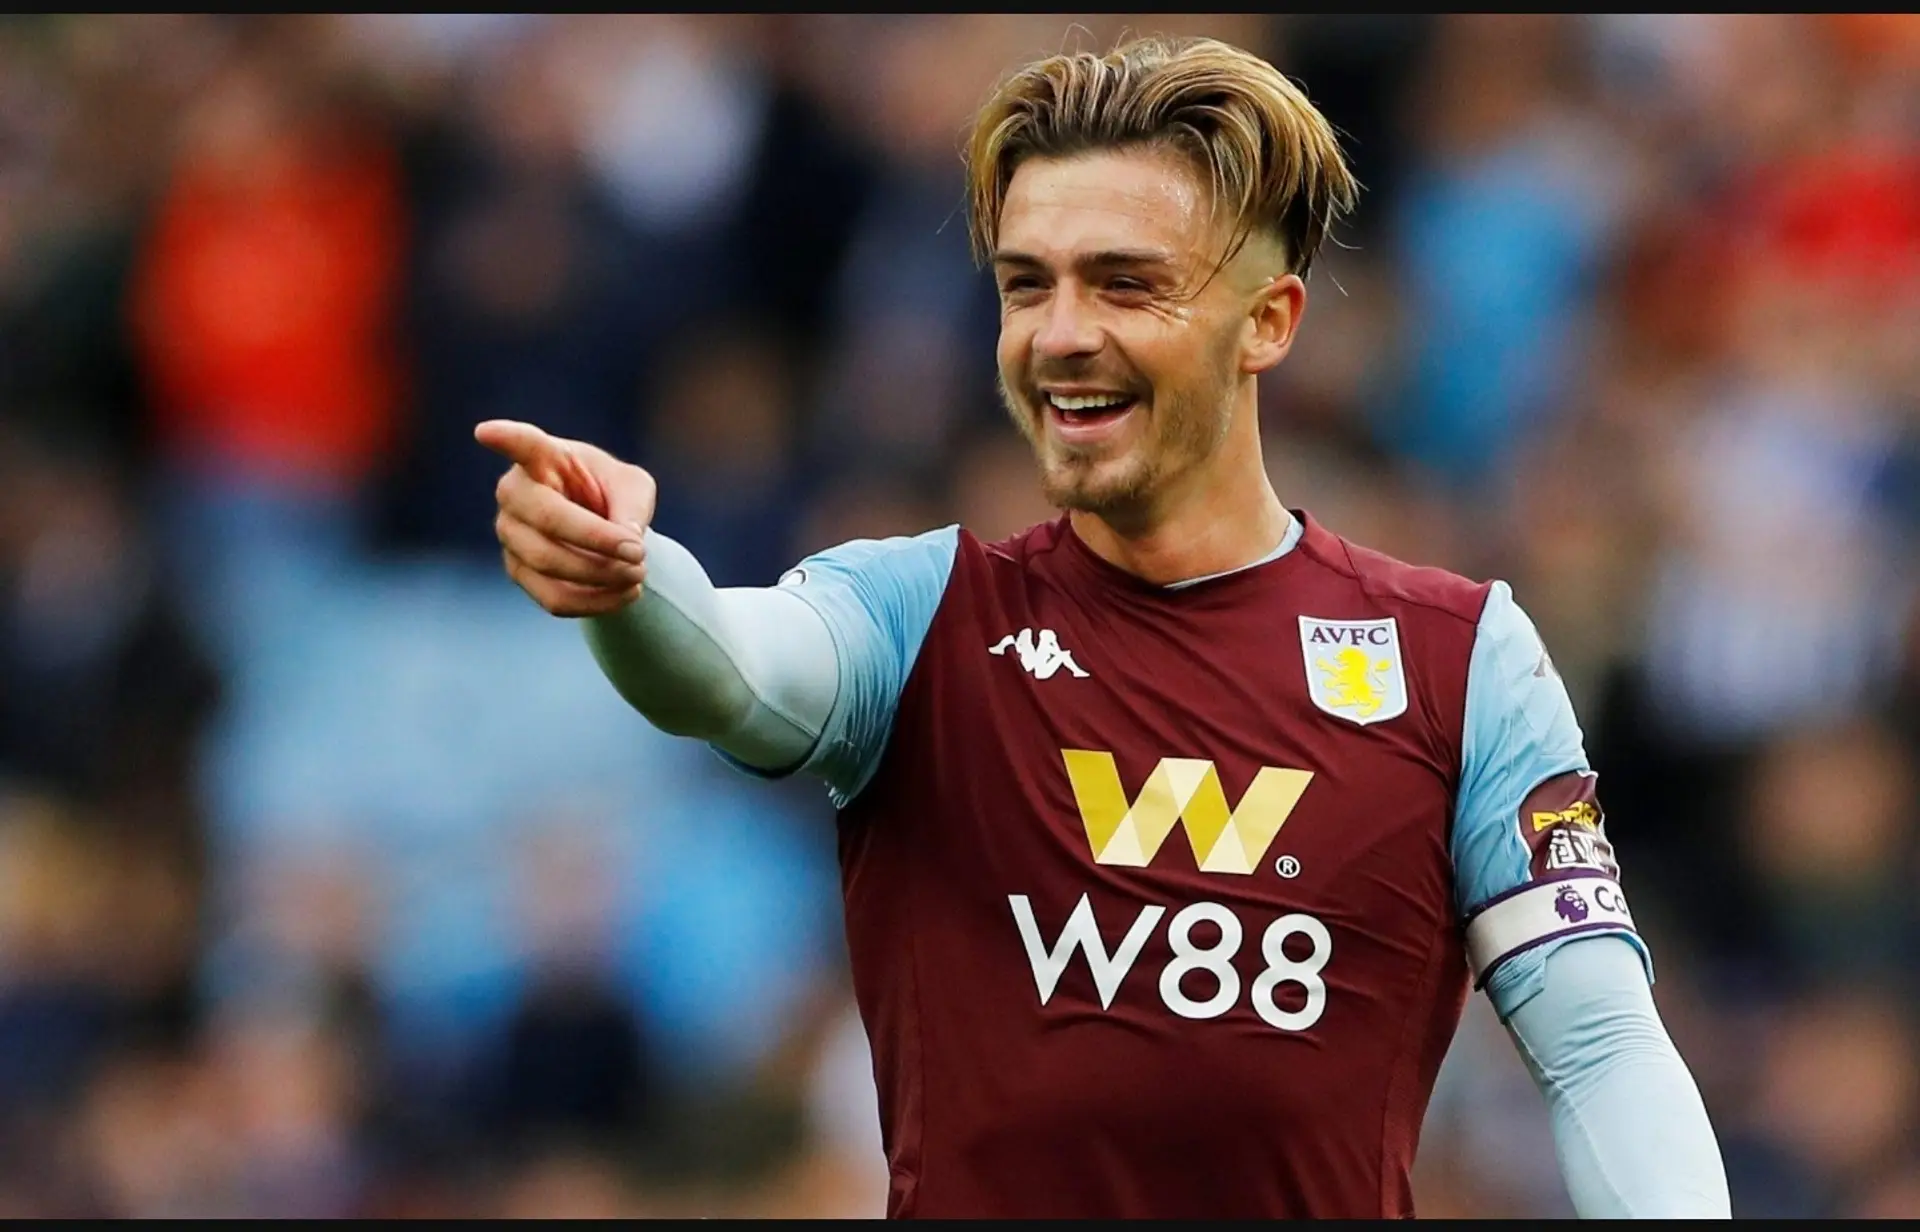 After Sancho.. Grealish or strengthen other areas?